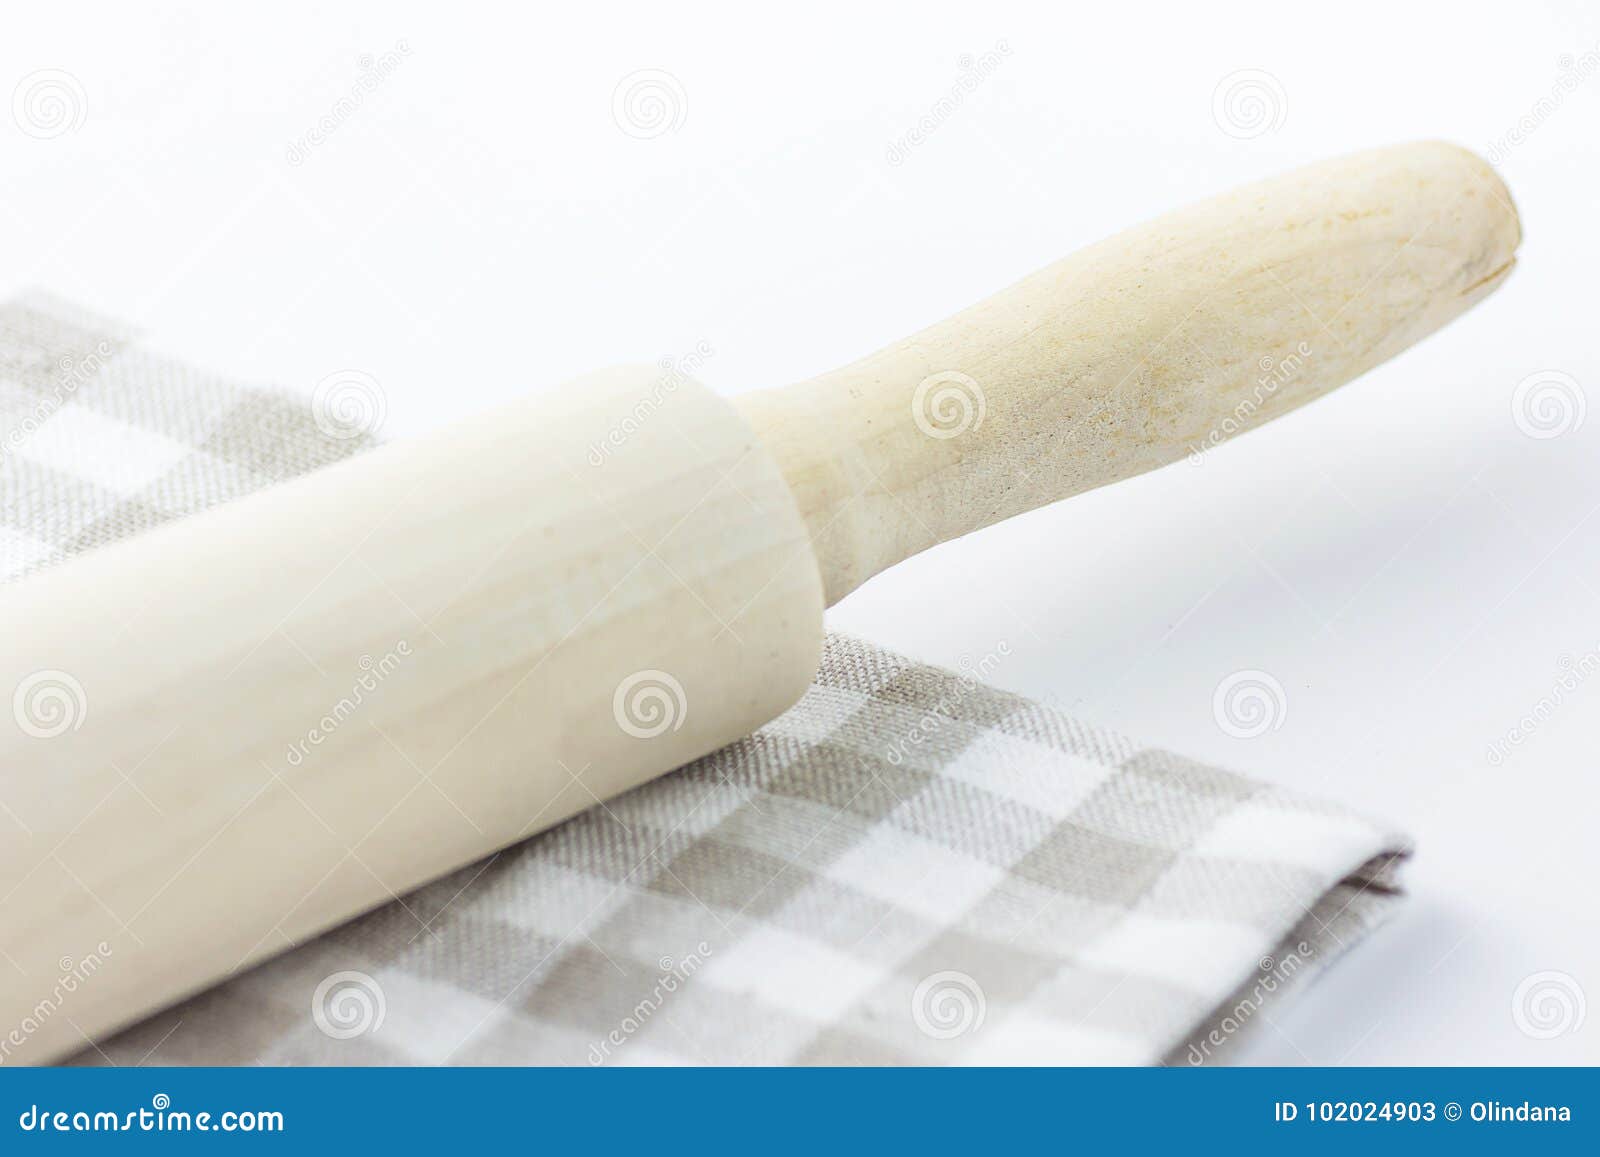 https://thumbs.dreamstime.com/z/wood-rolling-pin-white-beige-chequered-cotton-kitchen-towel-tabletop-baking-essentials-holidays-christmas-easter-wood-102024903.jpg